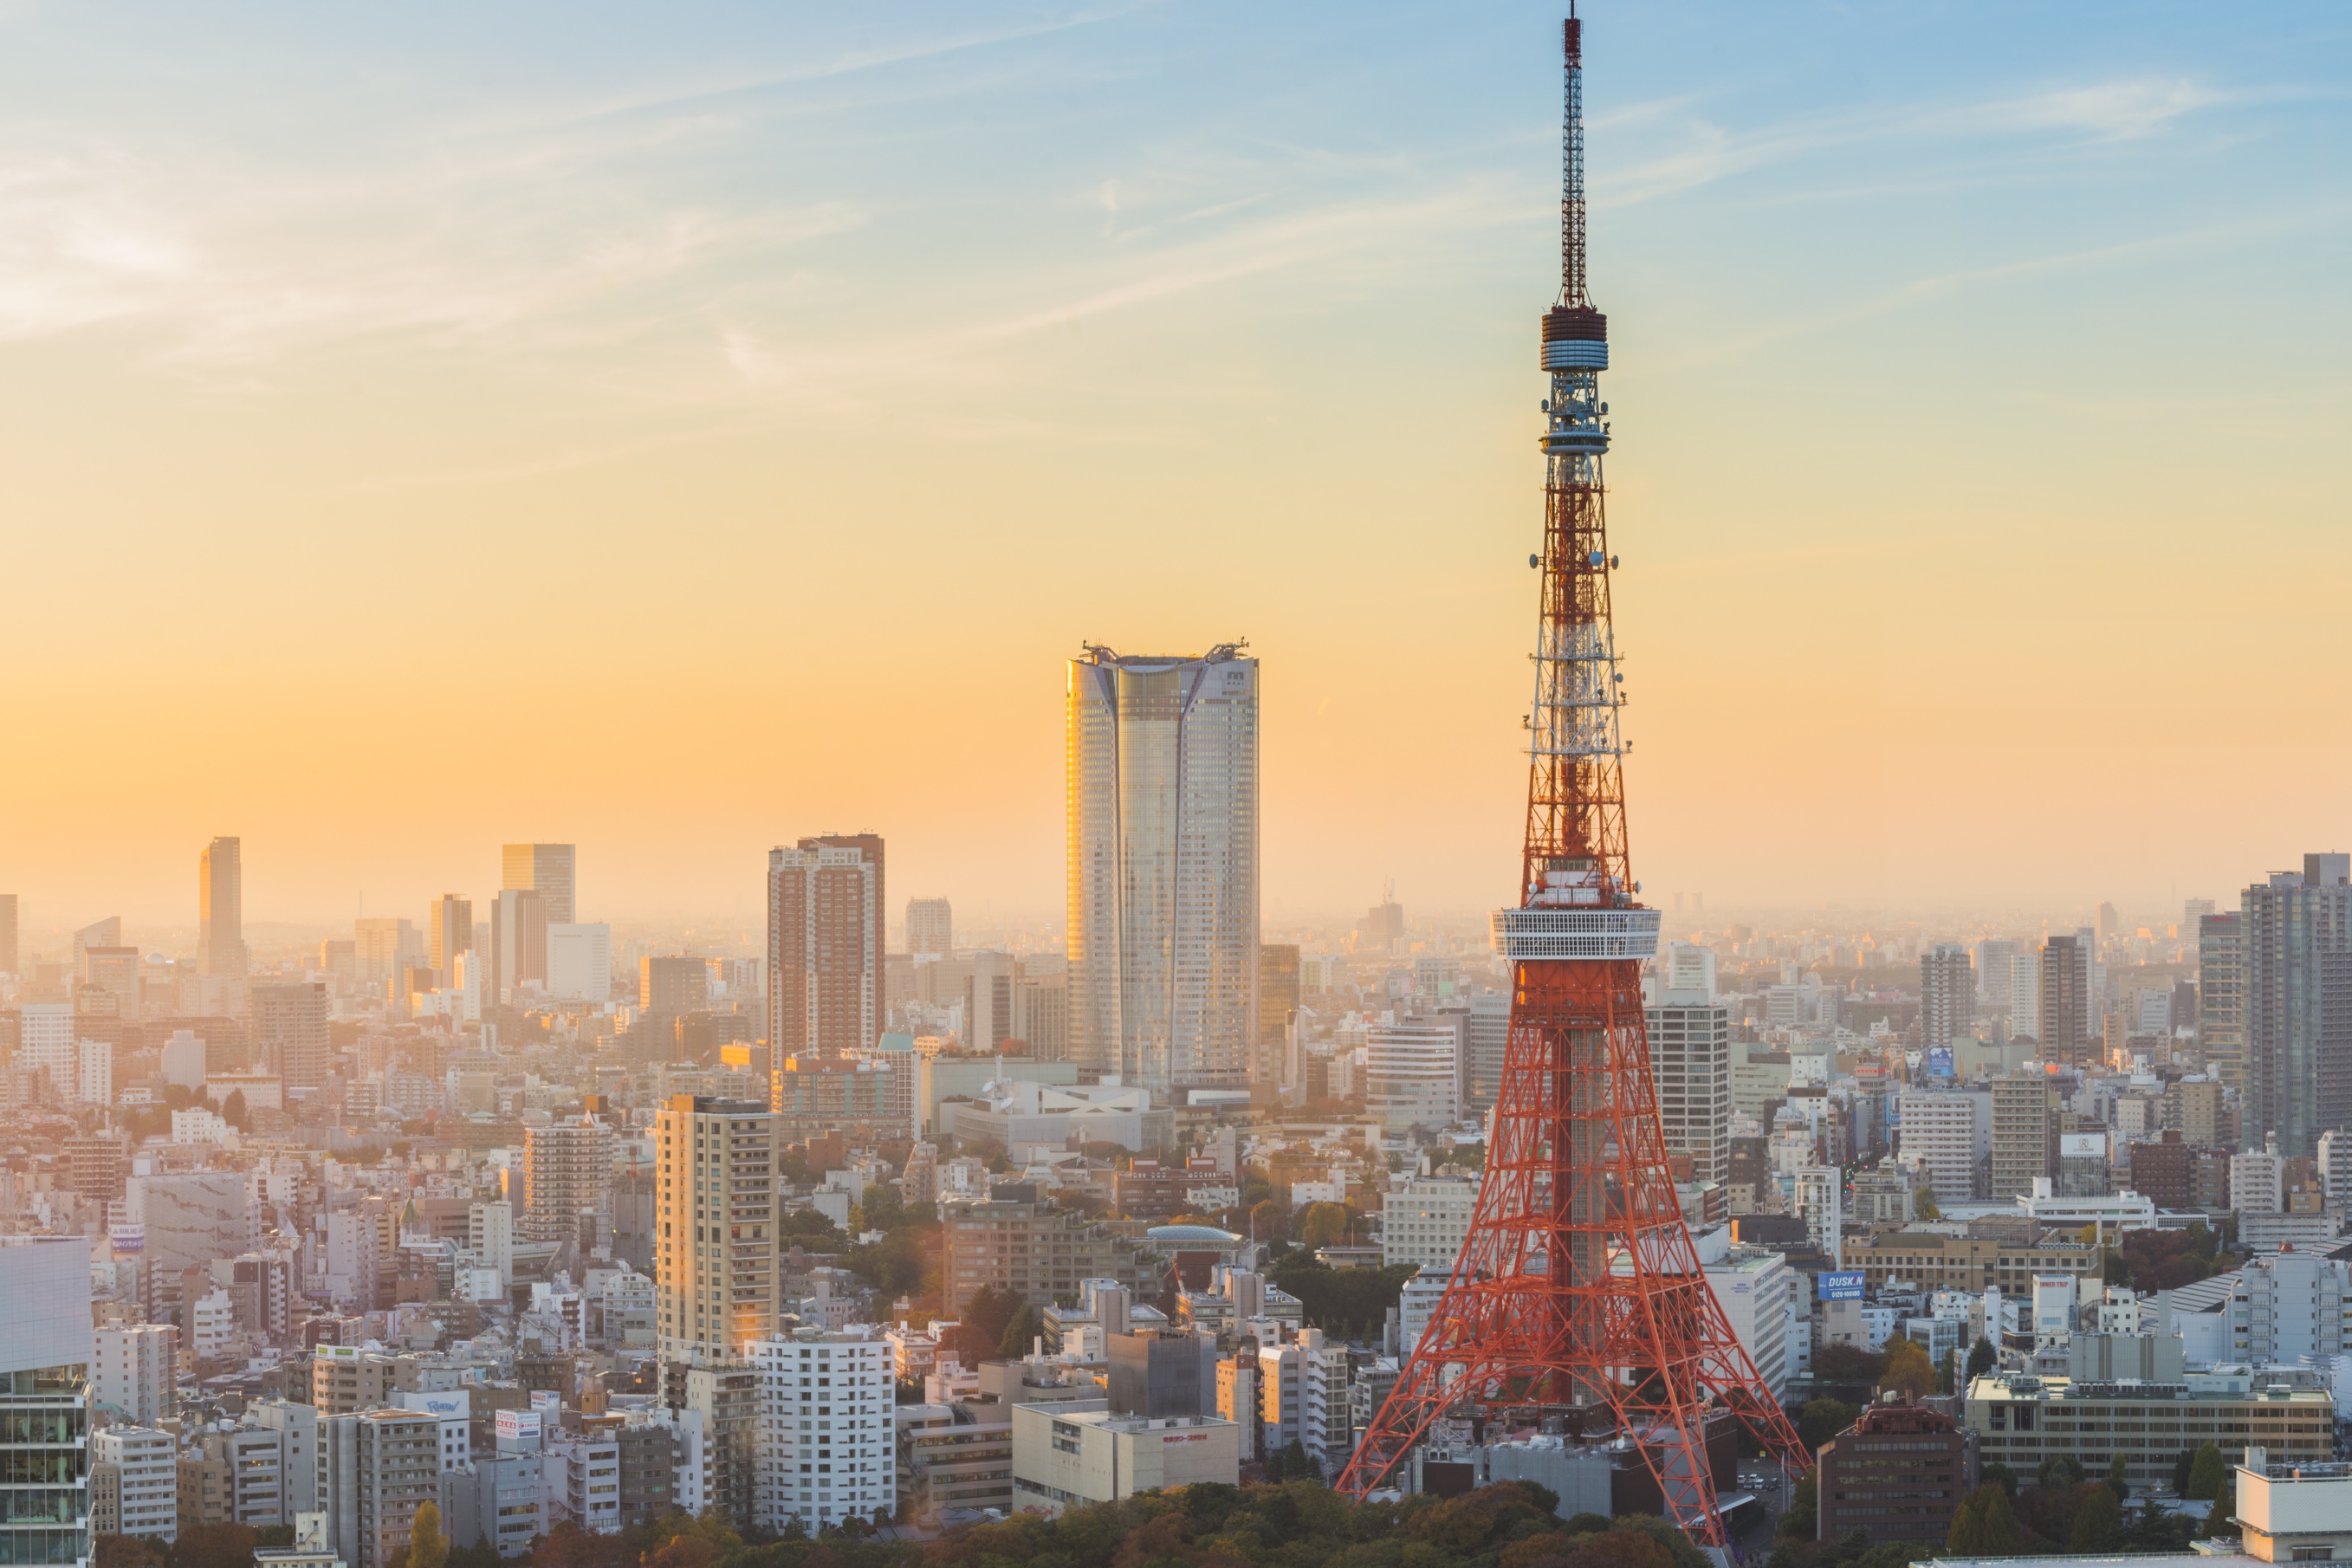 Tokyo Tower at sunset and twilight hours